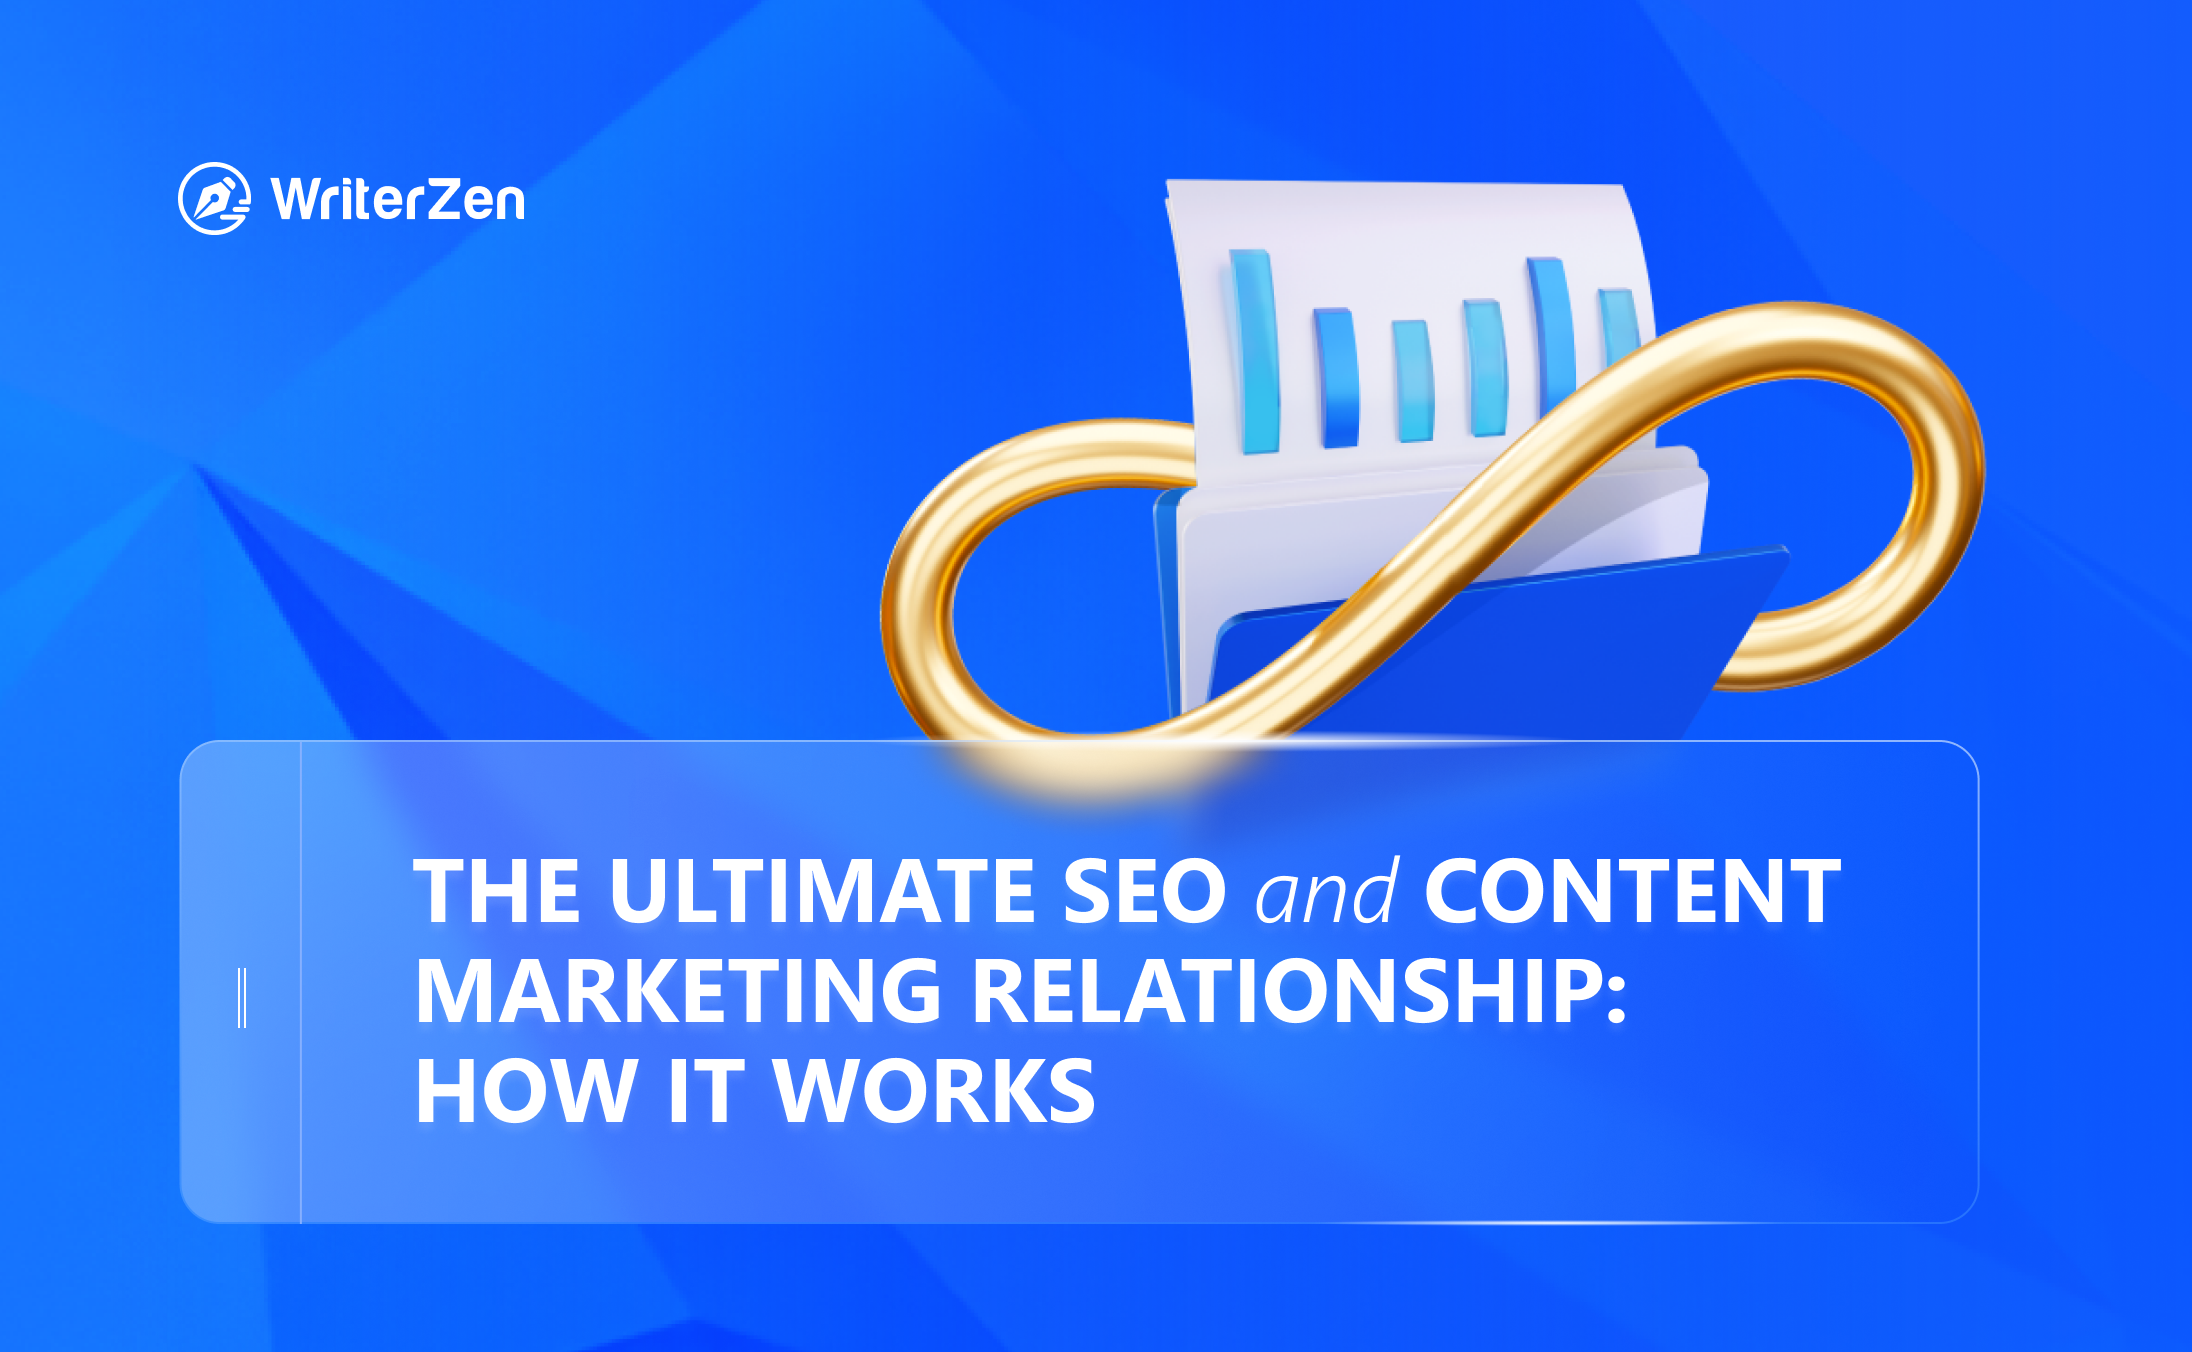 The Ultimate SEO and Content Marketing Relationship: How It Works